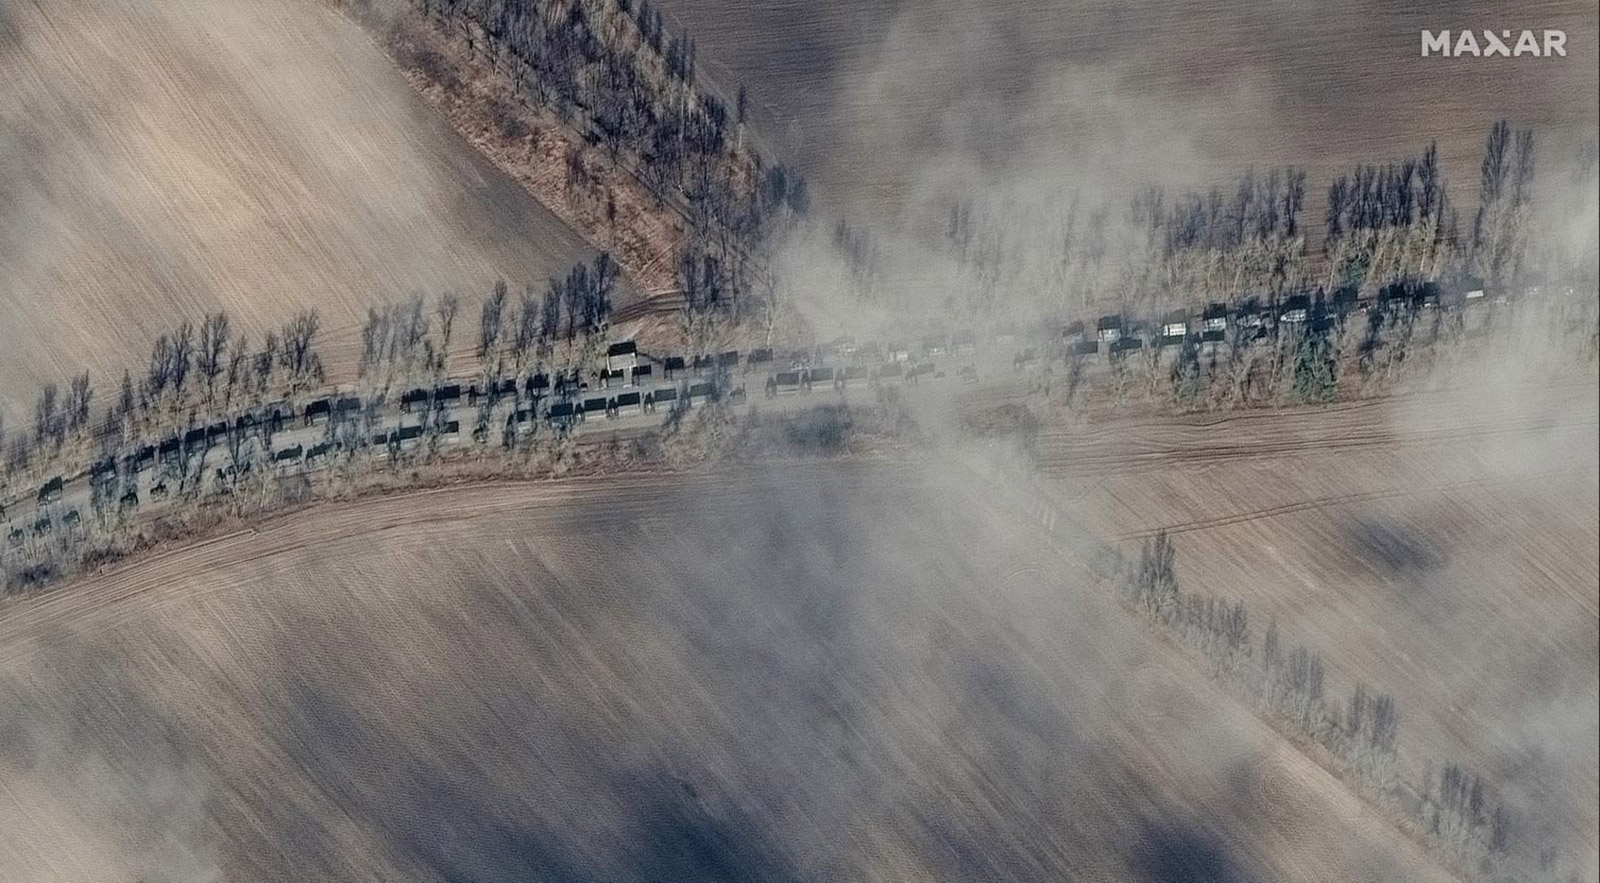 New satellite images show a more than three-mile-long Russian military convoy on a roadway that heads toward the capital city.